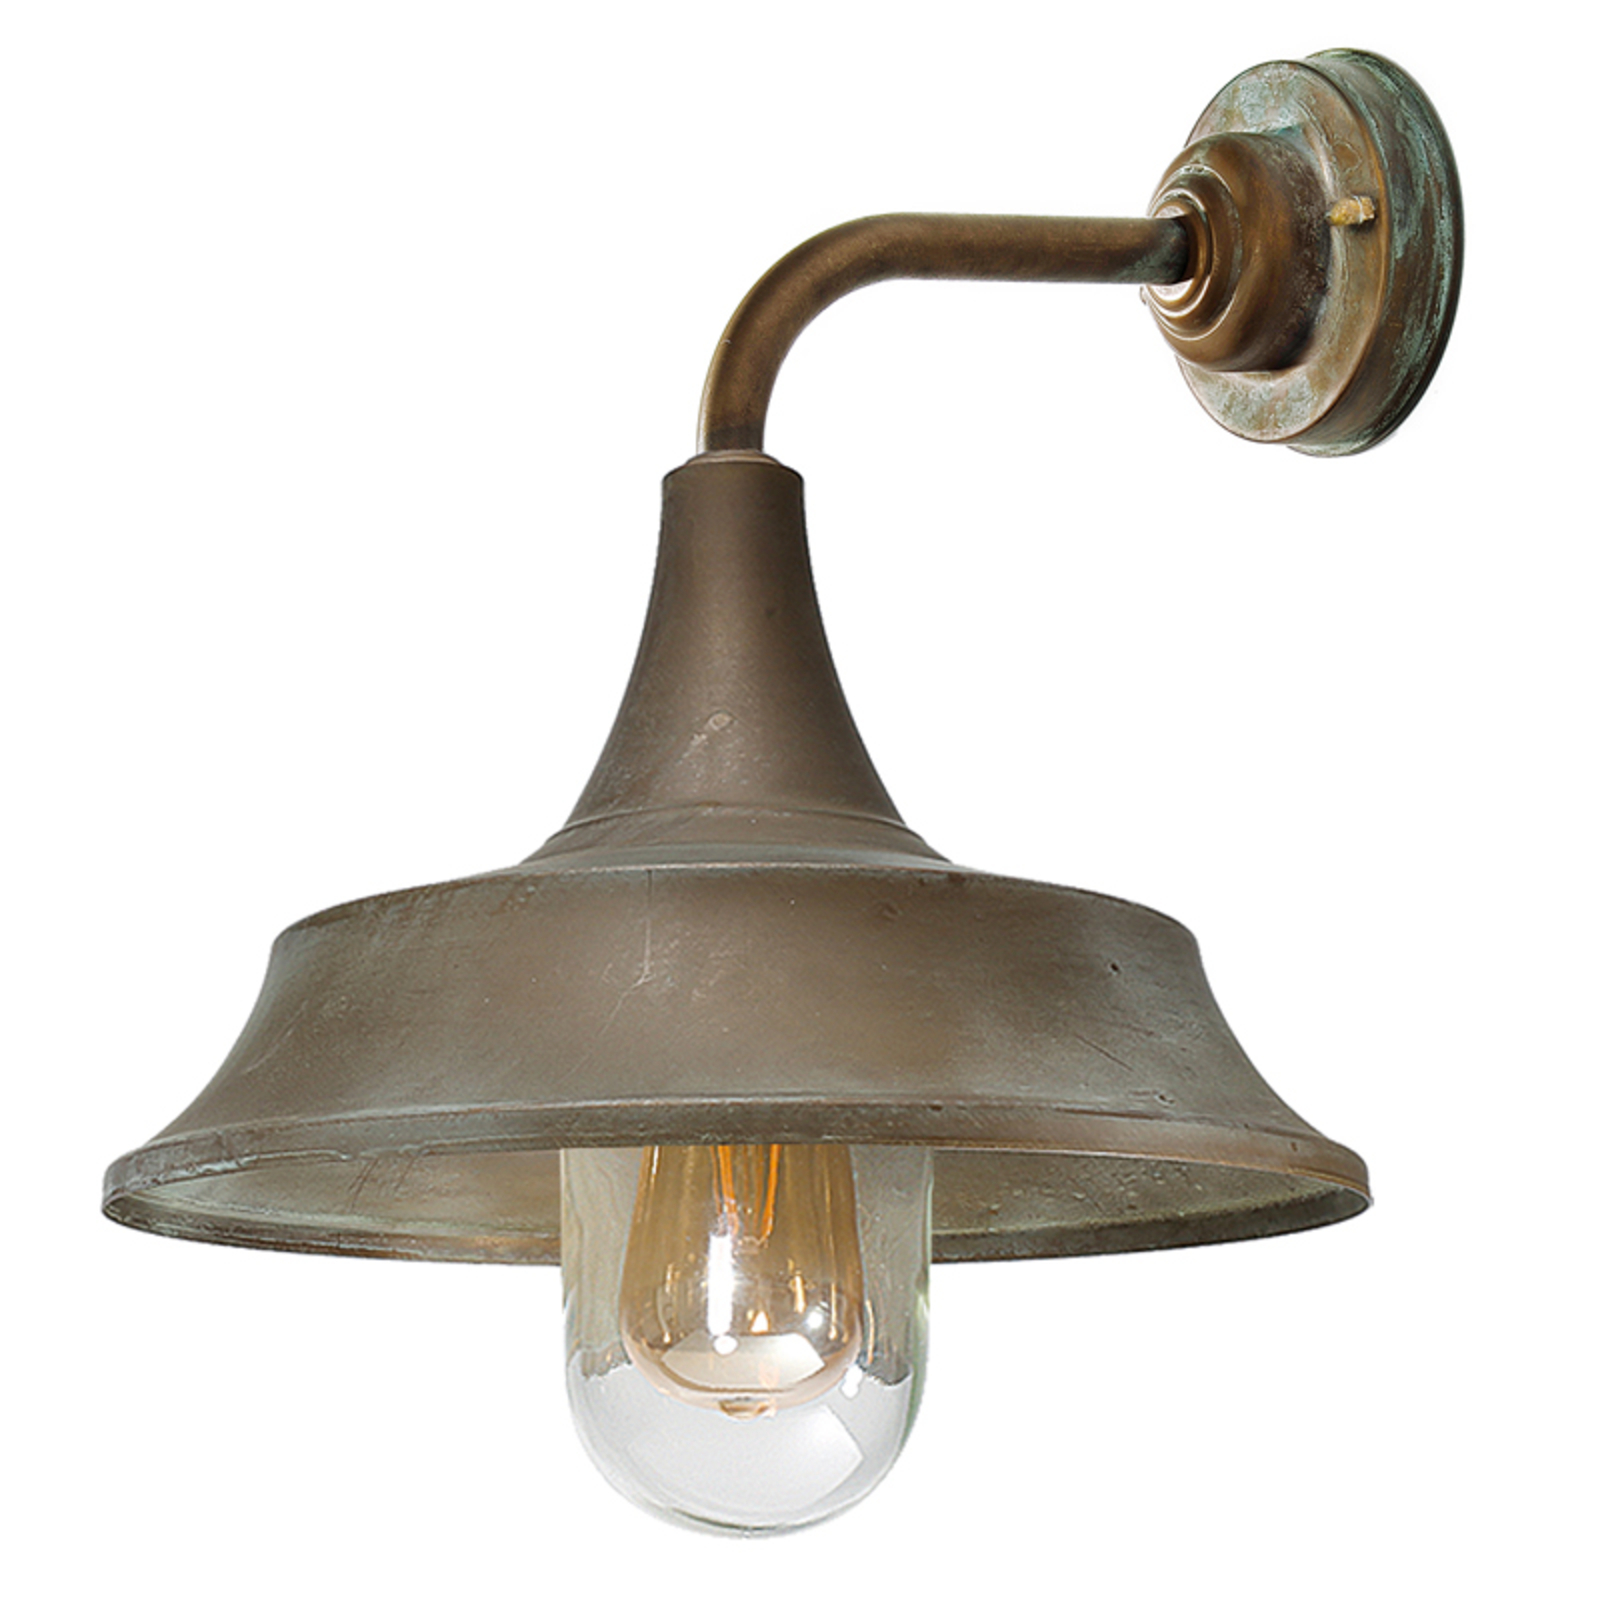 Ernesto outdoor wall light - seawater resistant